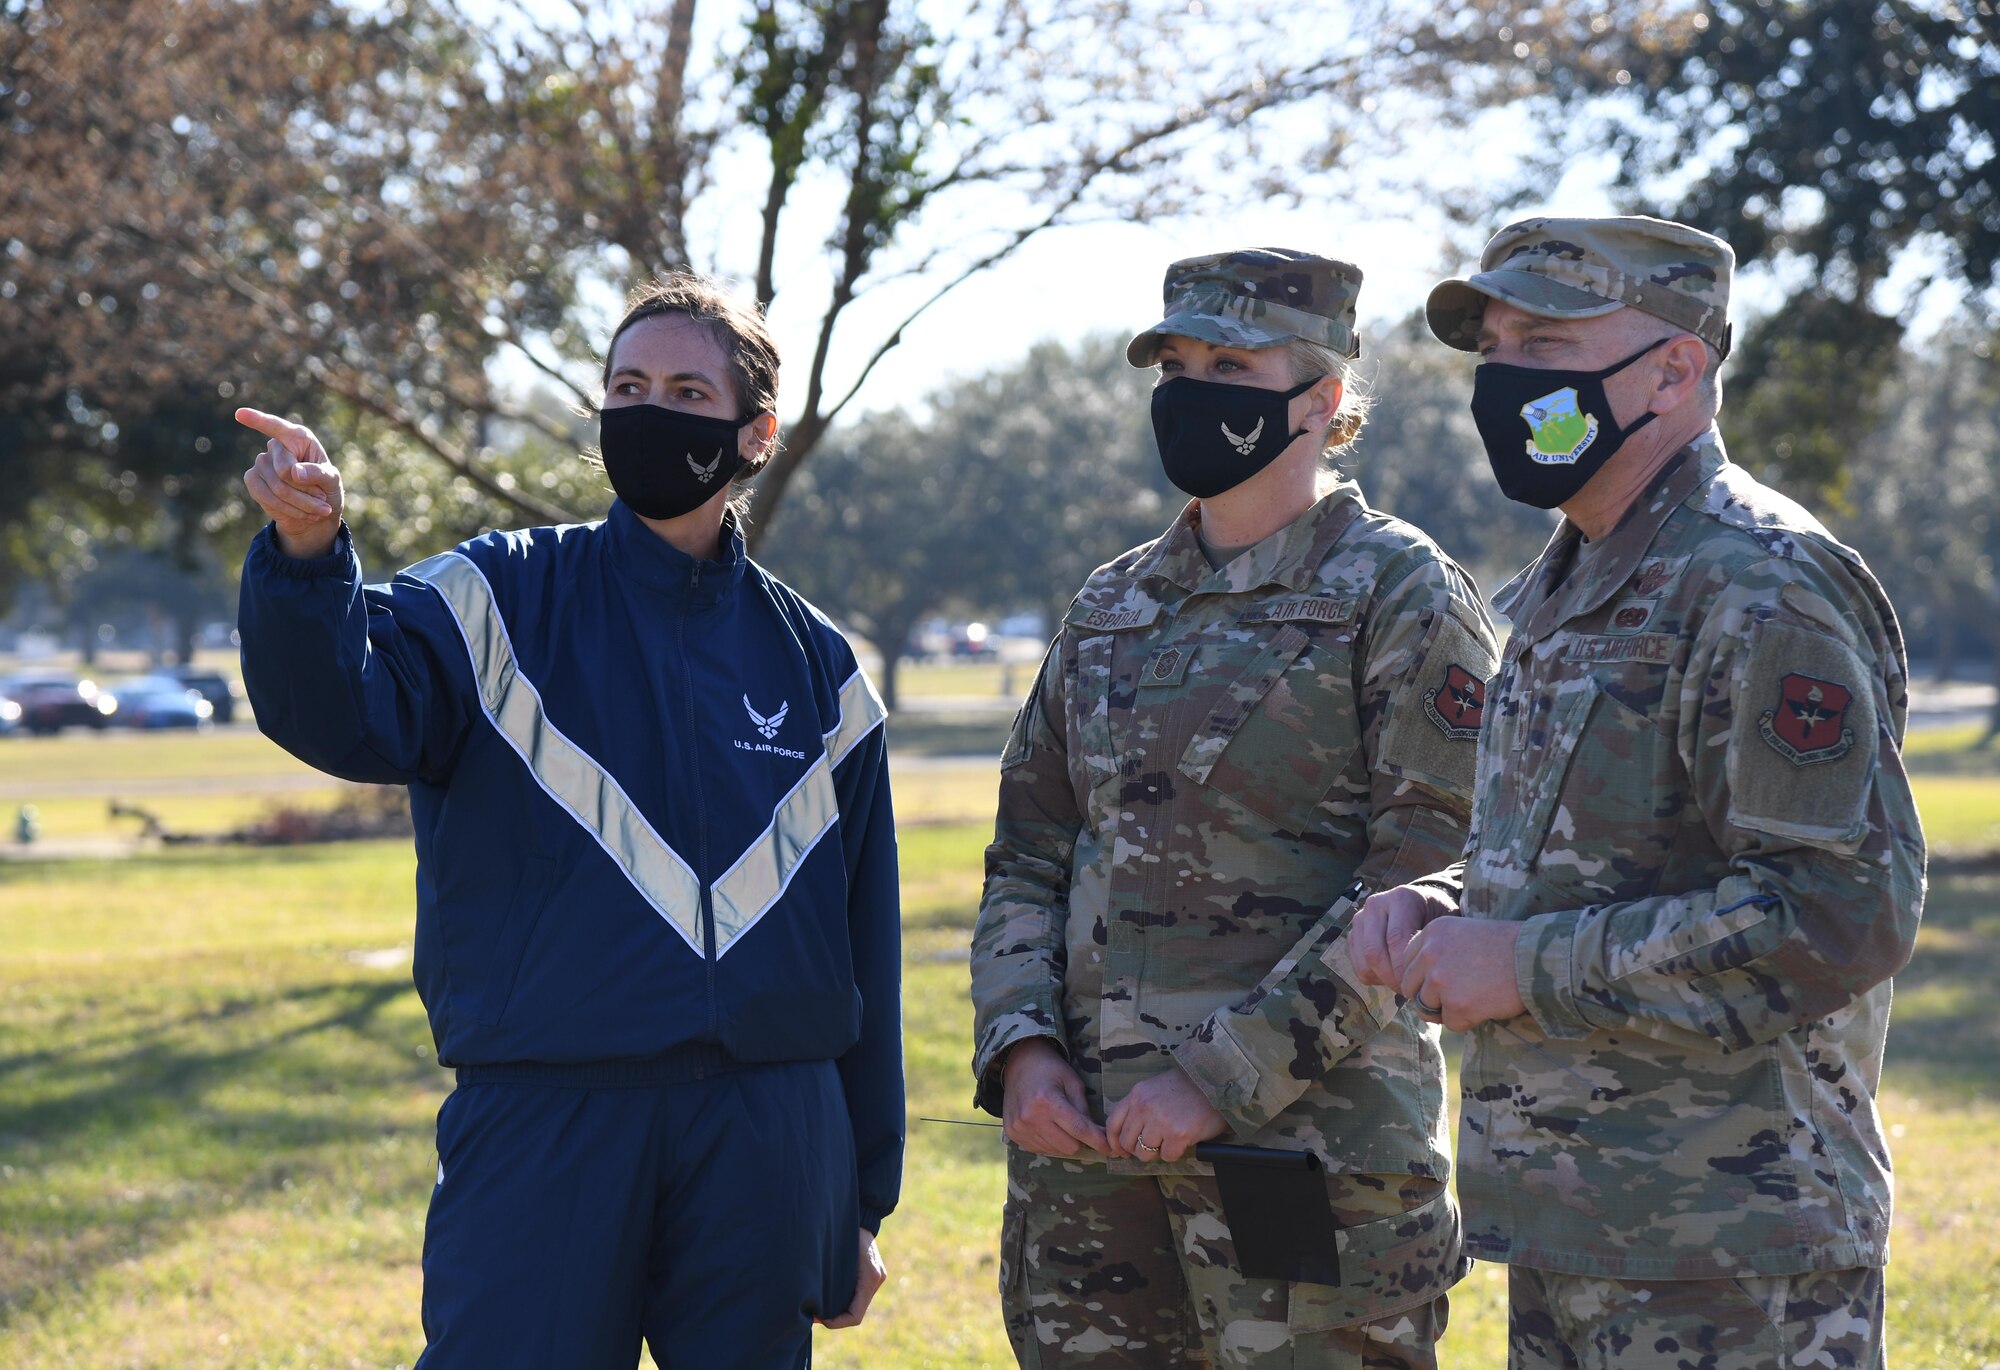 U.S. Air Force Col. Heather Blackwell, 81st Training Wing commander, points out the rally point to Chief Master Sgt. Sarah Esparza, 81st TRW command chief, and Chief Master Sgt. Erik Thompson, command chief of Air Education and Training Command, at Heritage Field during the Dragon March at Keesler Air Force Base, Mississippi, Dec. 8, 2020. The theme of the three-mile walk was "Stronger Together." (U.S. Air Force photo by Kemberly Groue)